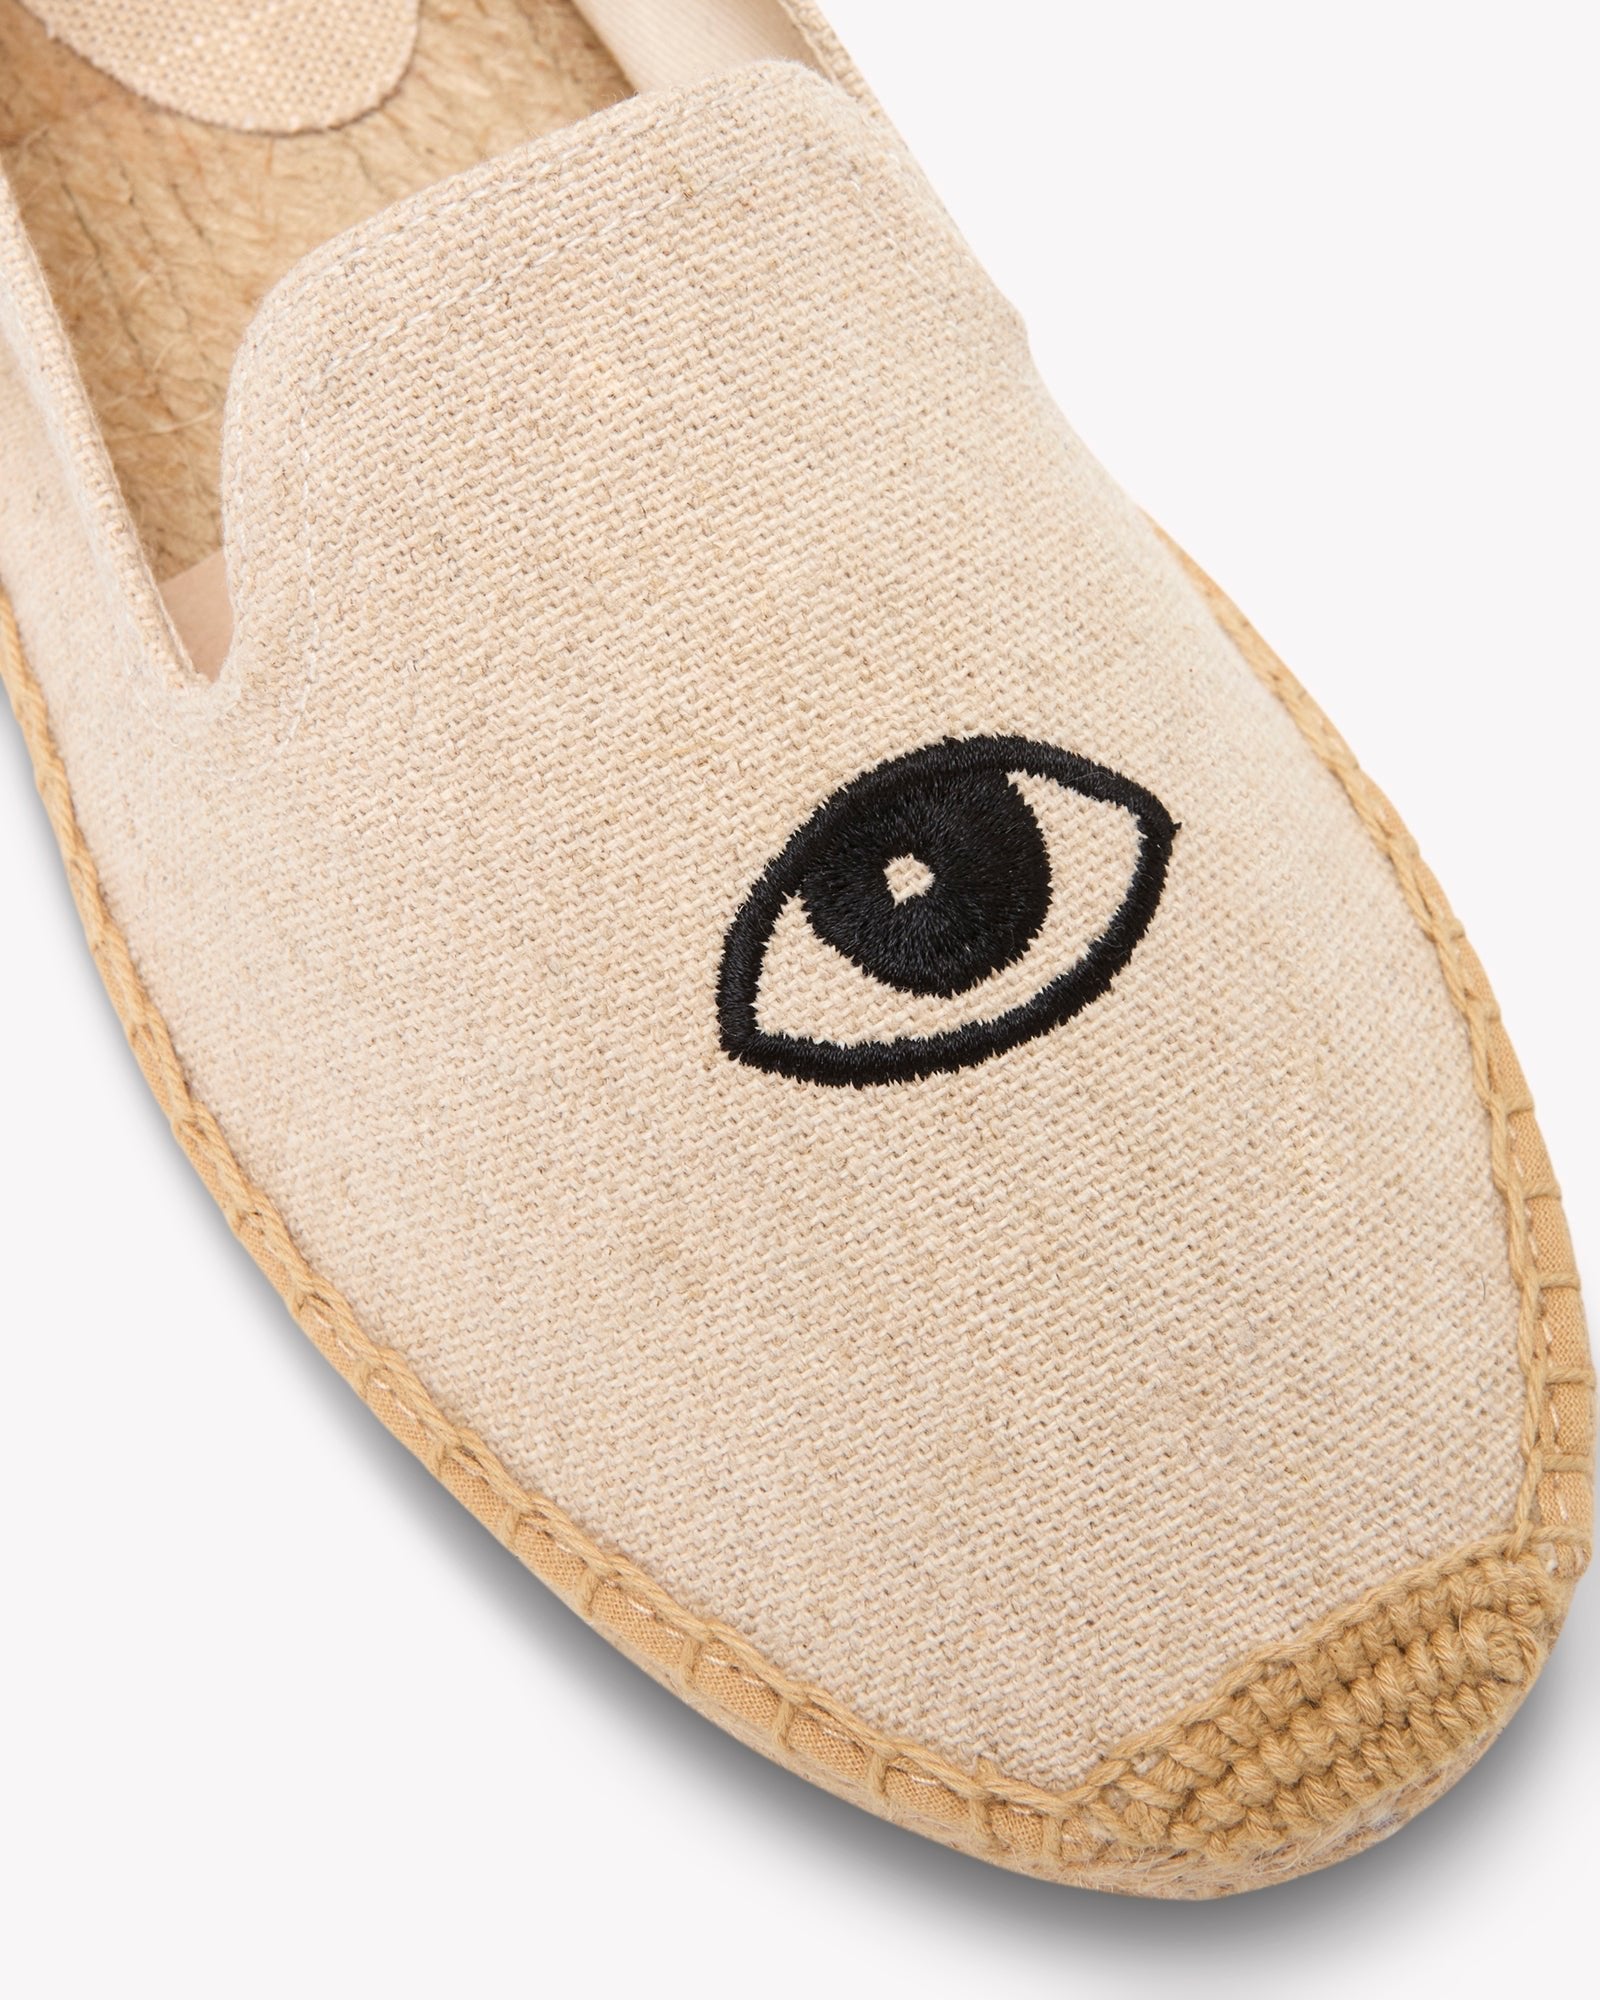 The Smoking Slipper - Embroidery / Wink - Natural Undyed - Women's - Women's Espadrilles - Natural Undyed / Wink - Soludos -